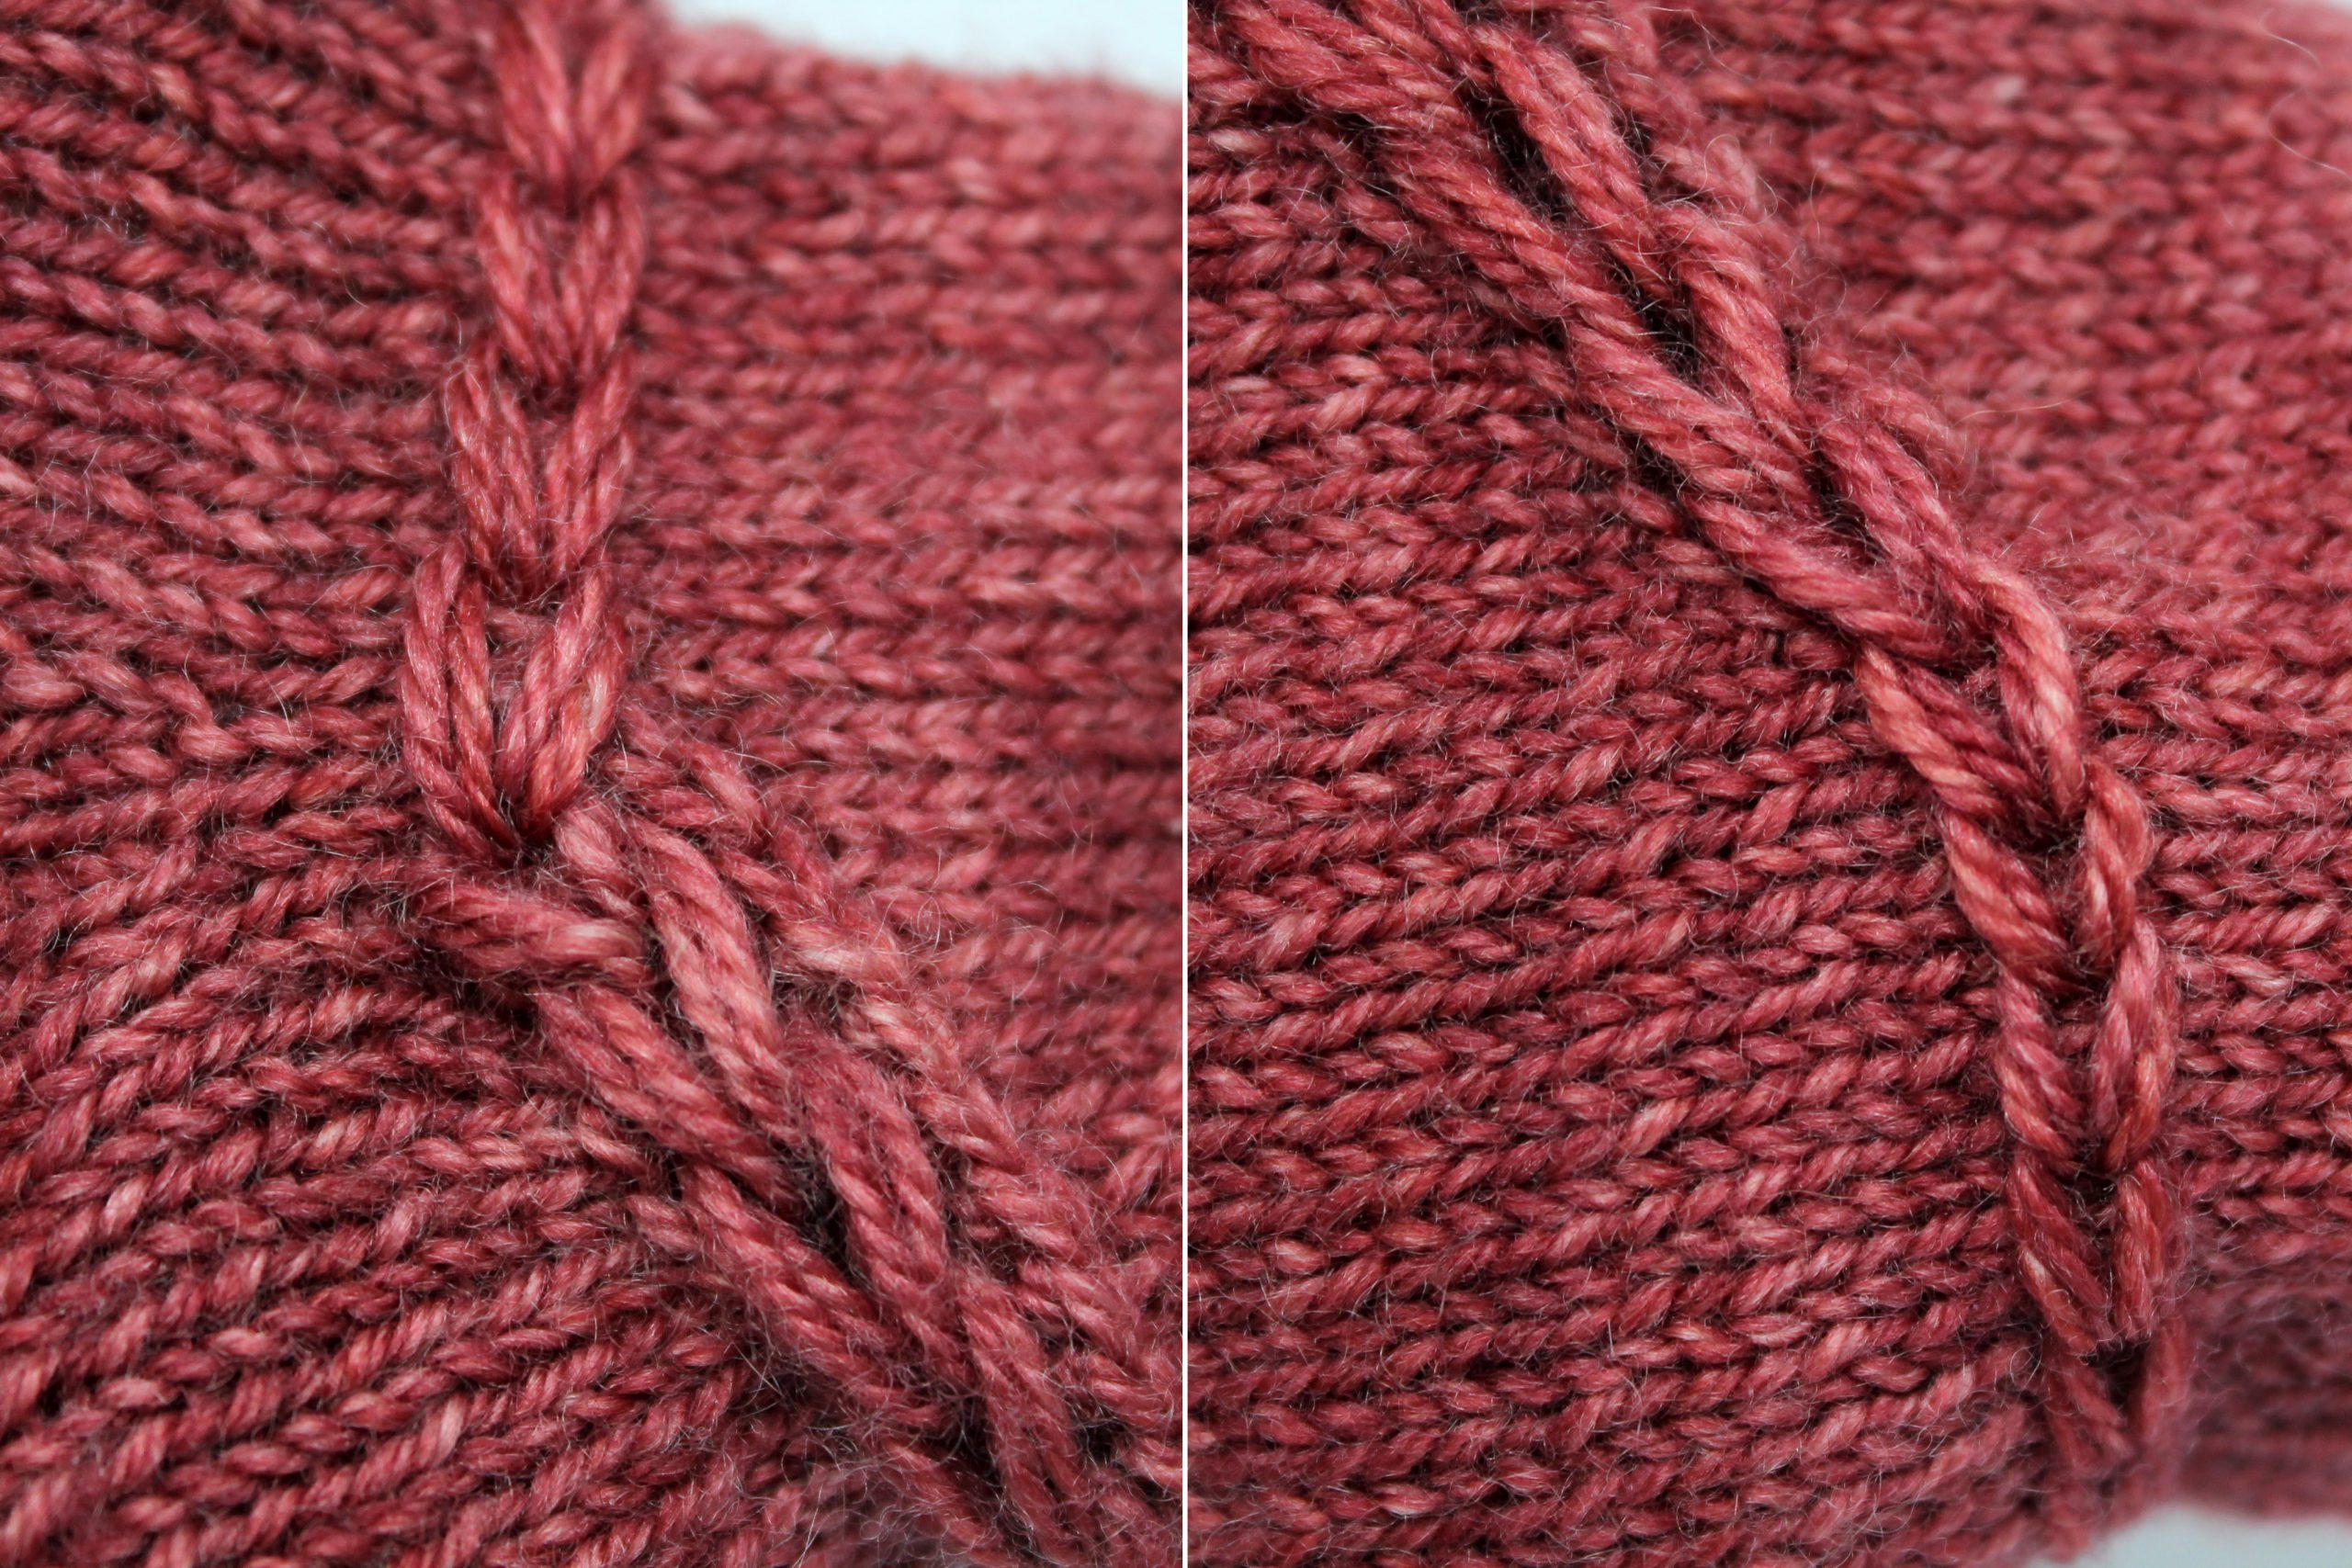 Close ups of the finished chain stitch showing how it joins to the dropped stitch braid at each end